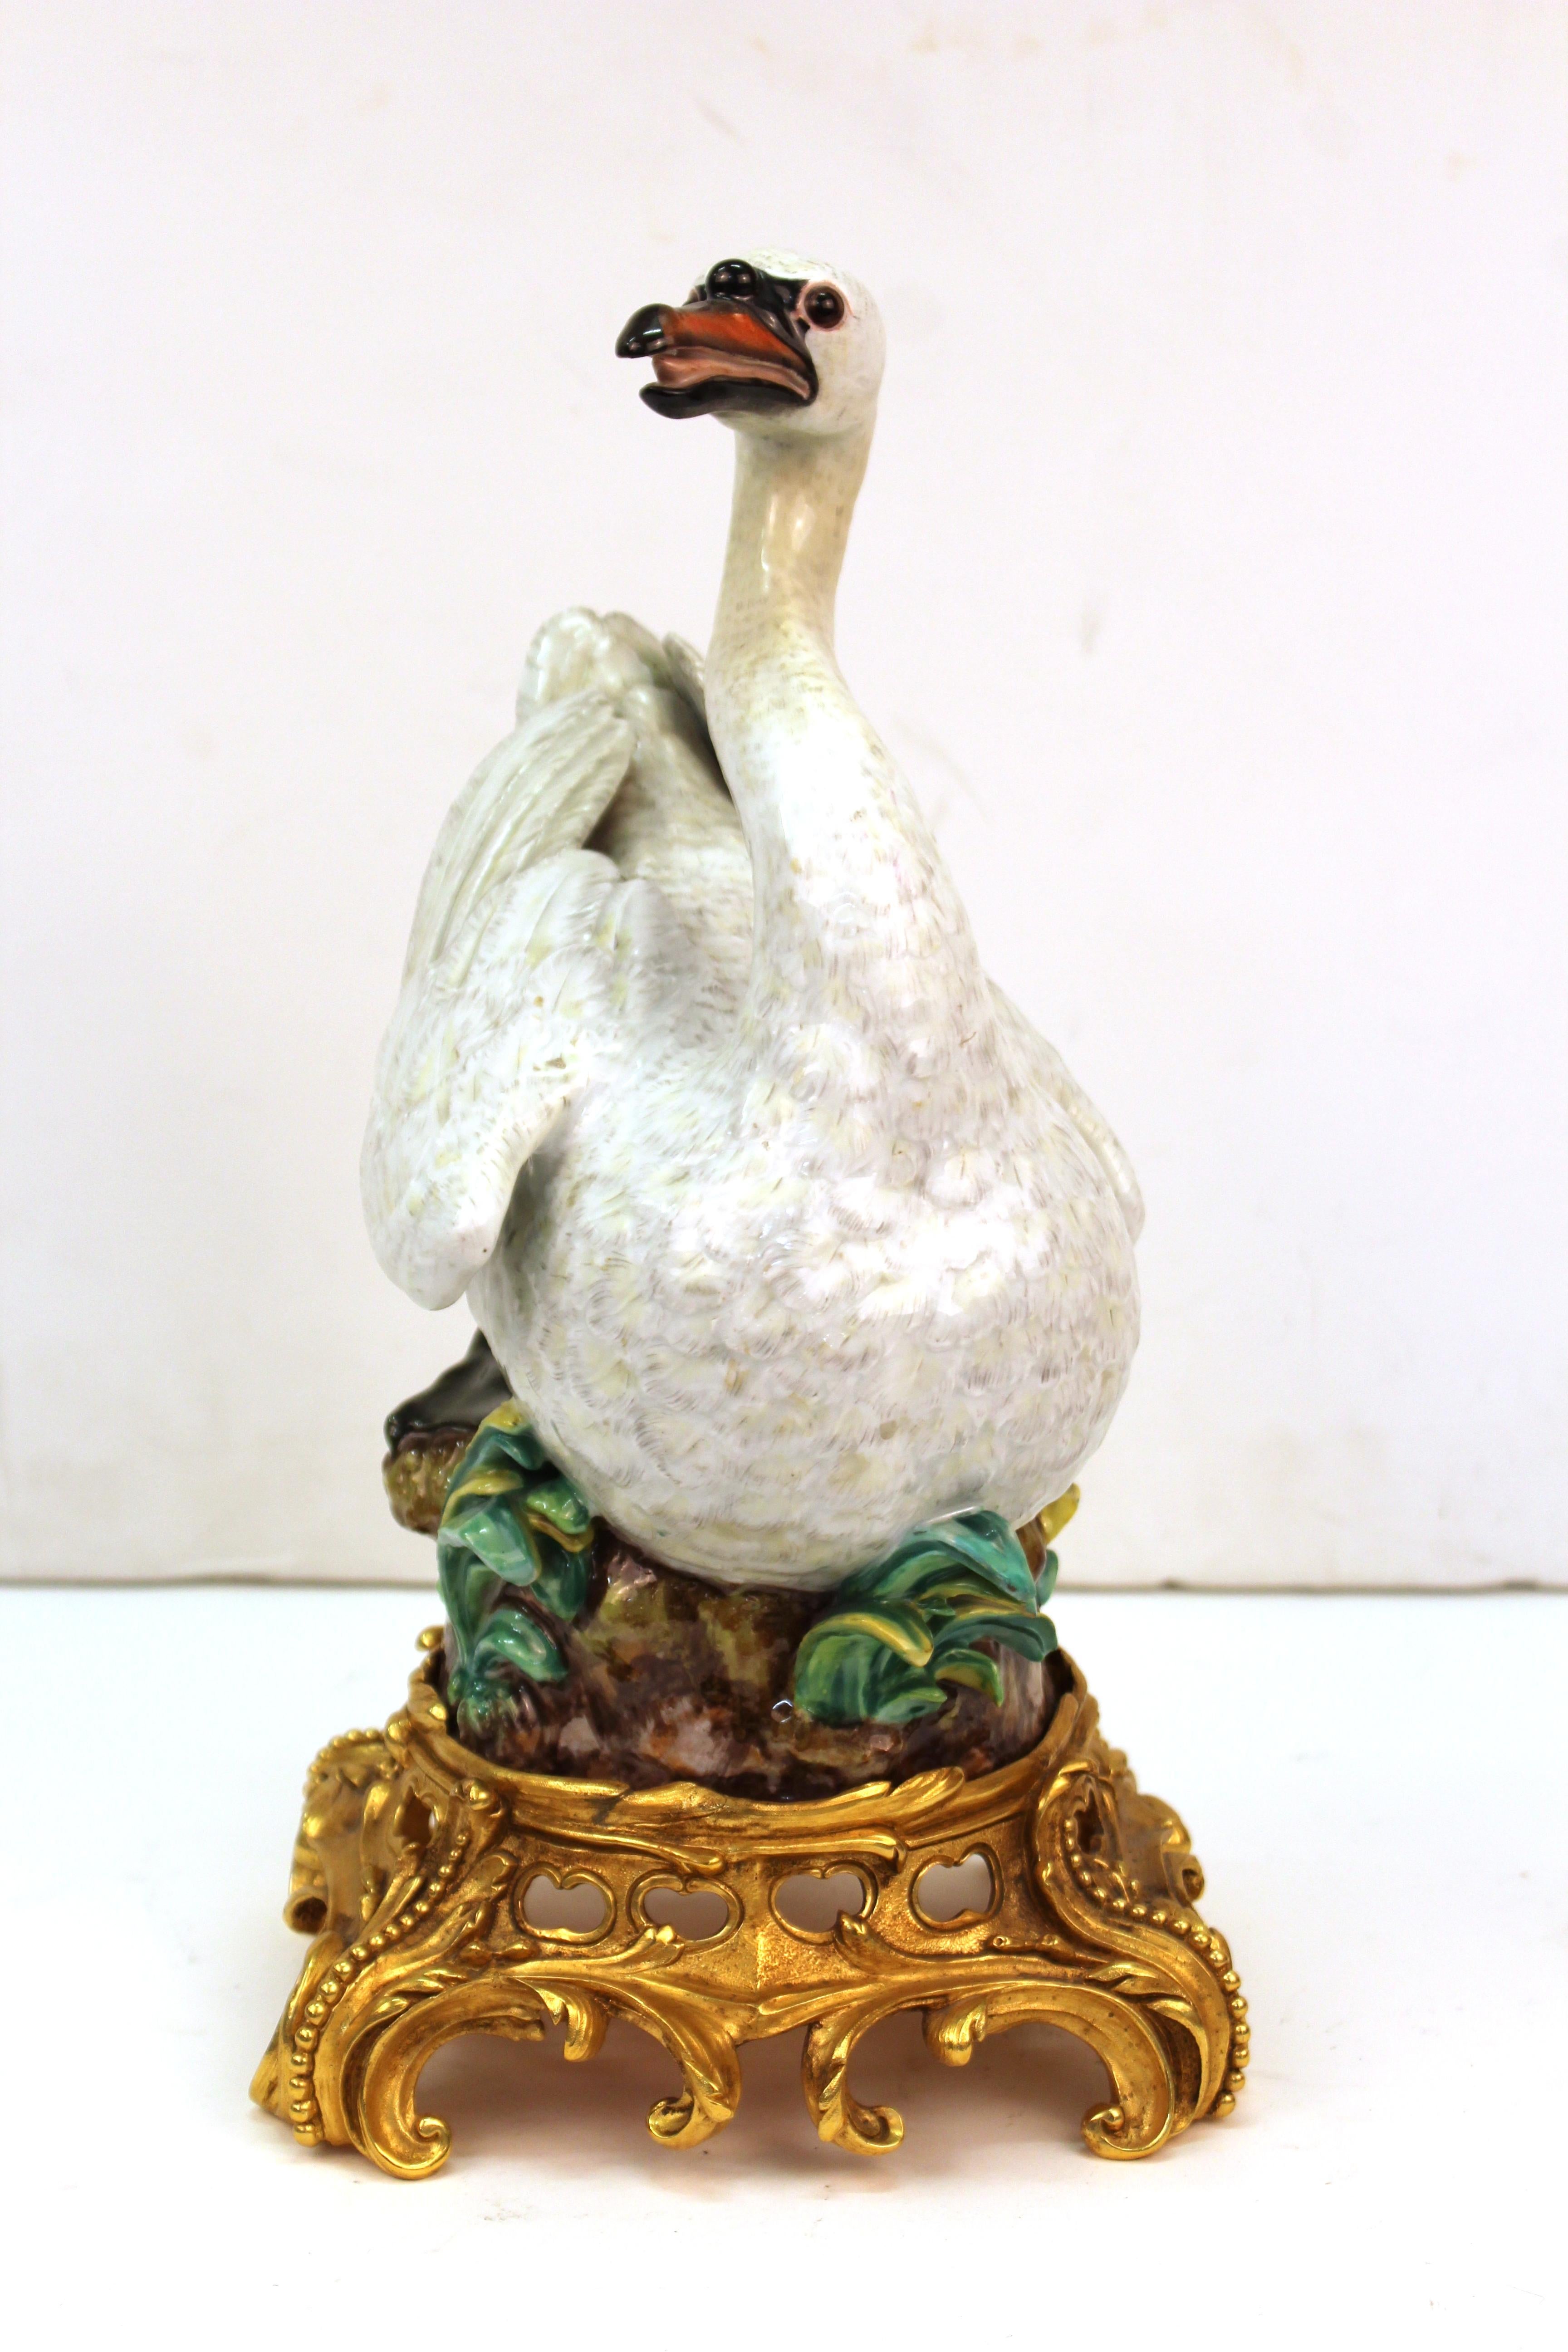 Baroque style porcelain swan sculpture hand-made and hand-painted by Dresden porcelain. The piece is mounted atop a gilt bronze Baroque style base. The swan is hand-painted. In great condition with age-appropriate wear and use and some minor old